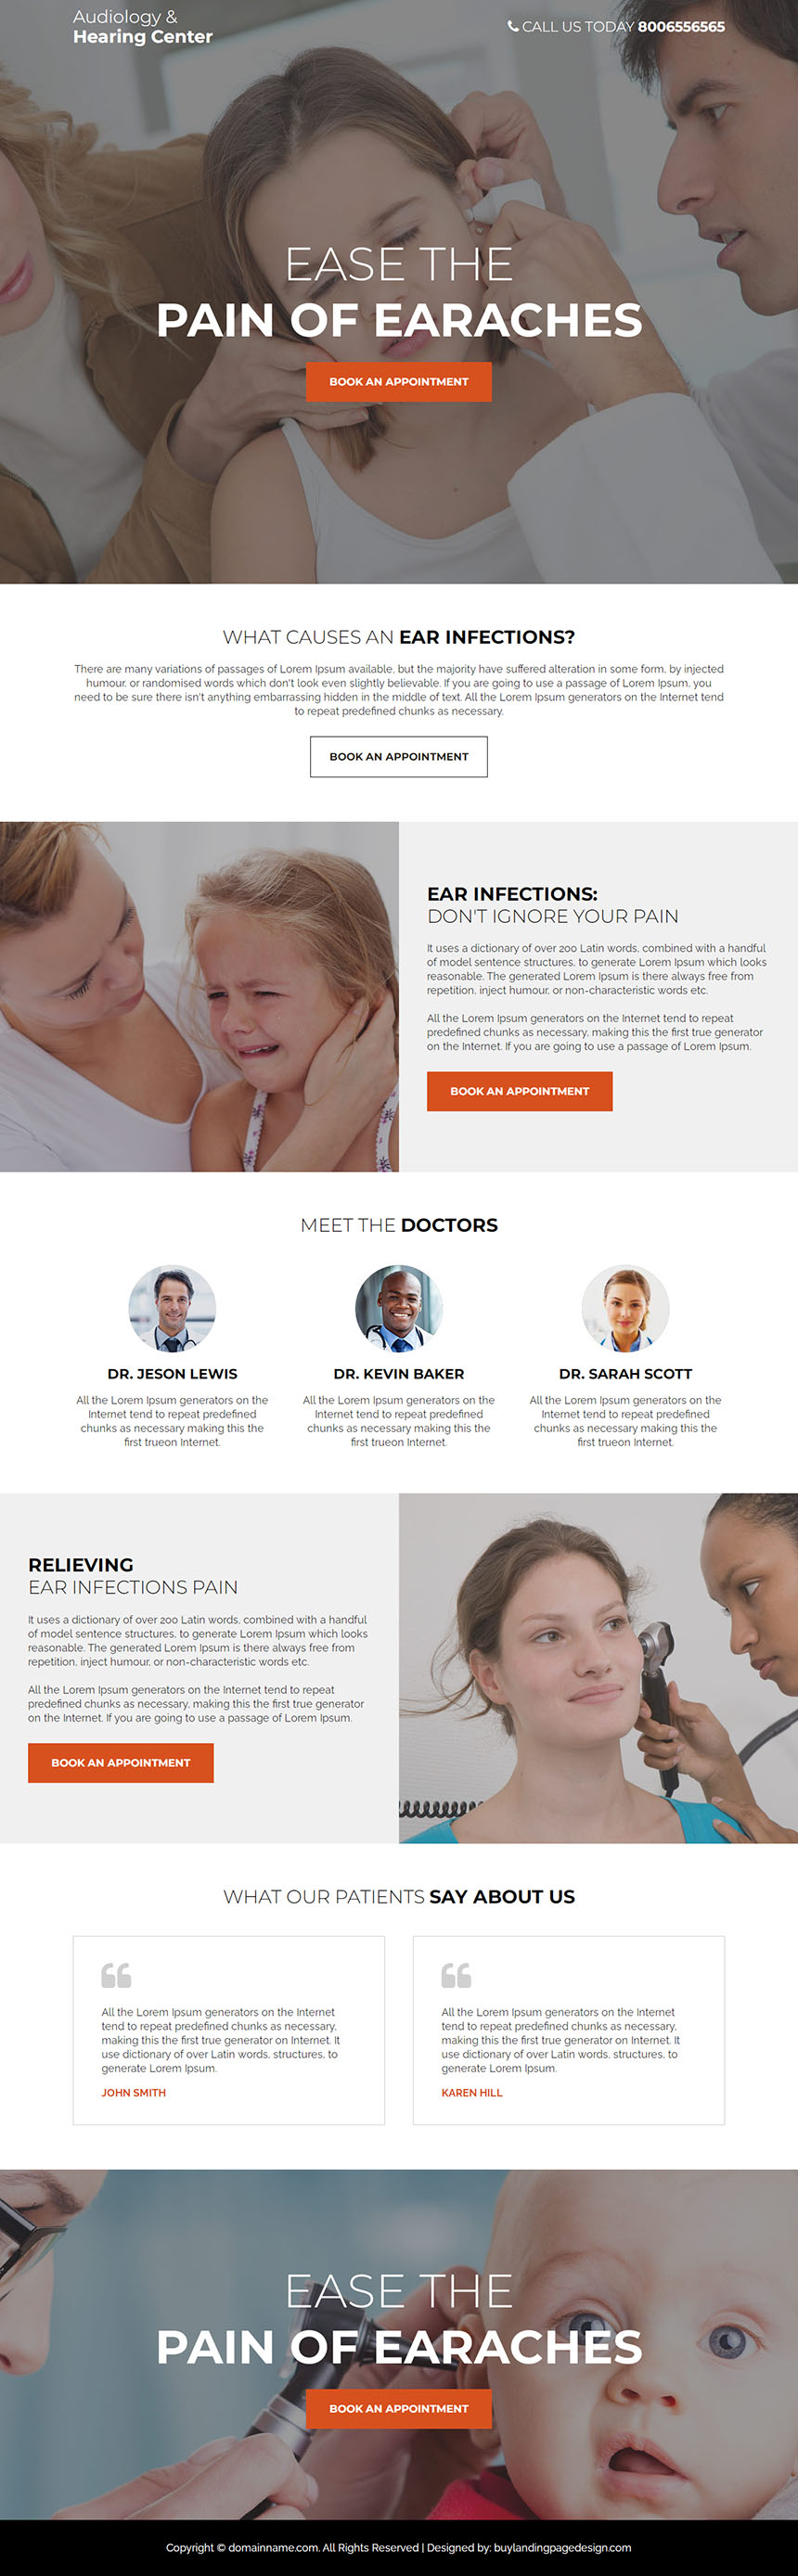 audiology and hearing loss solution responsive landing page